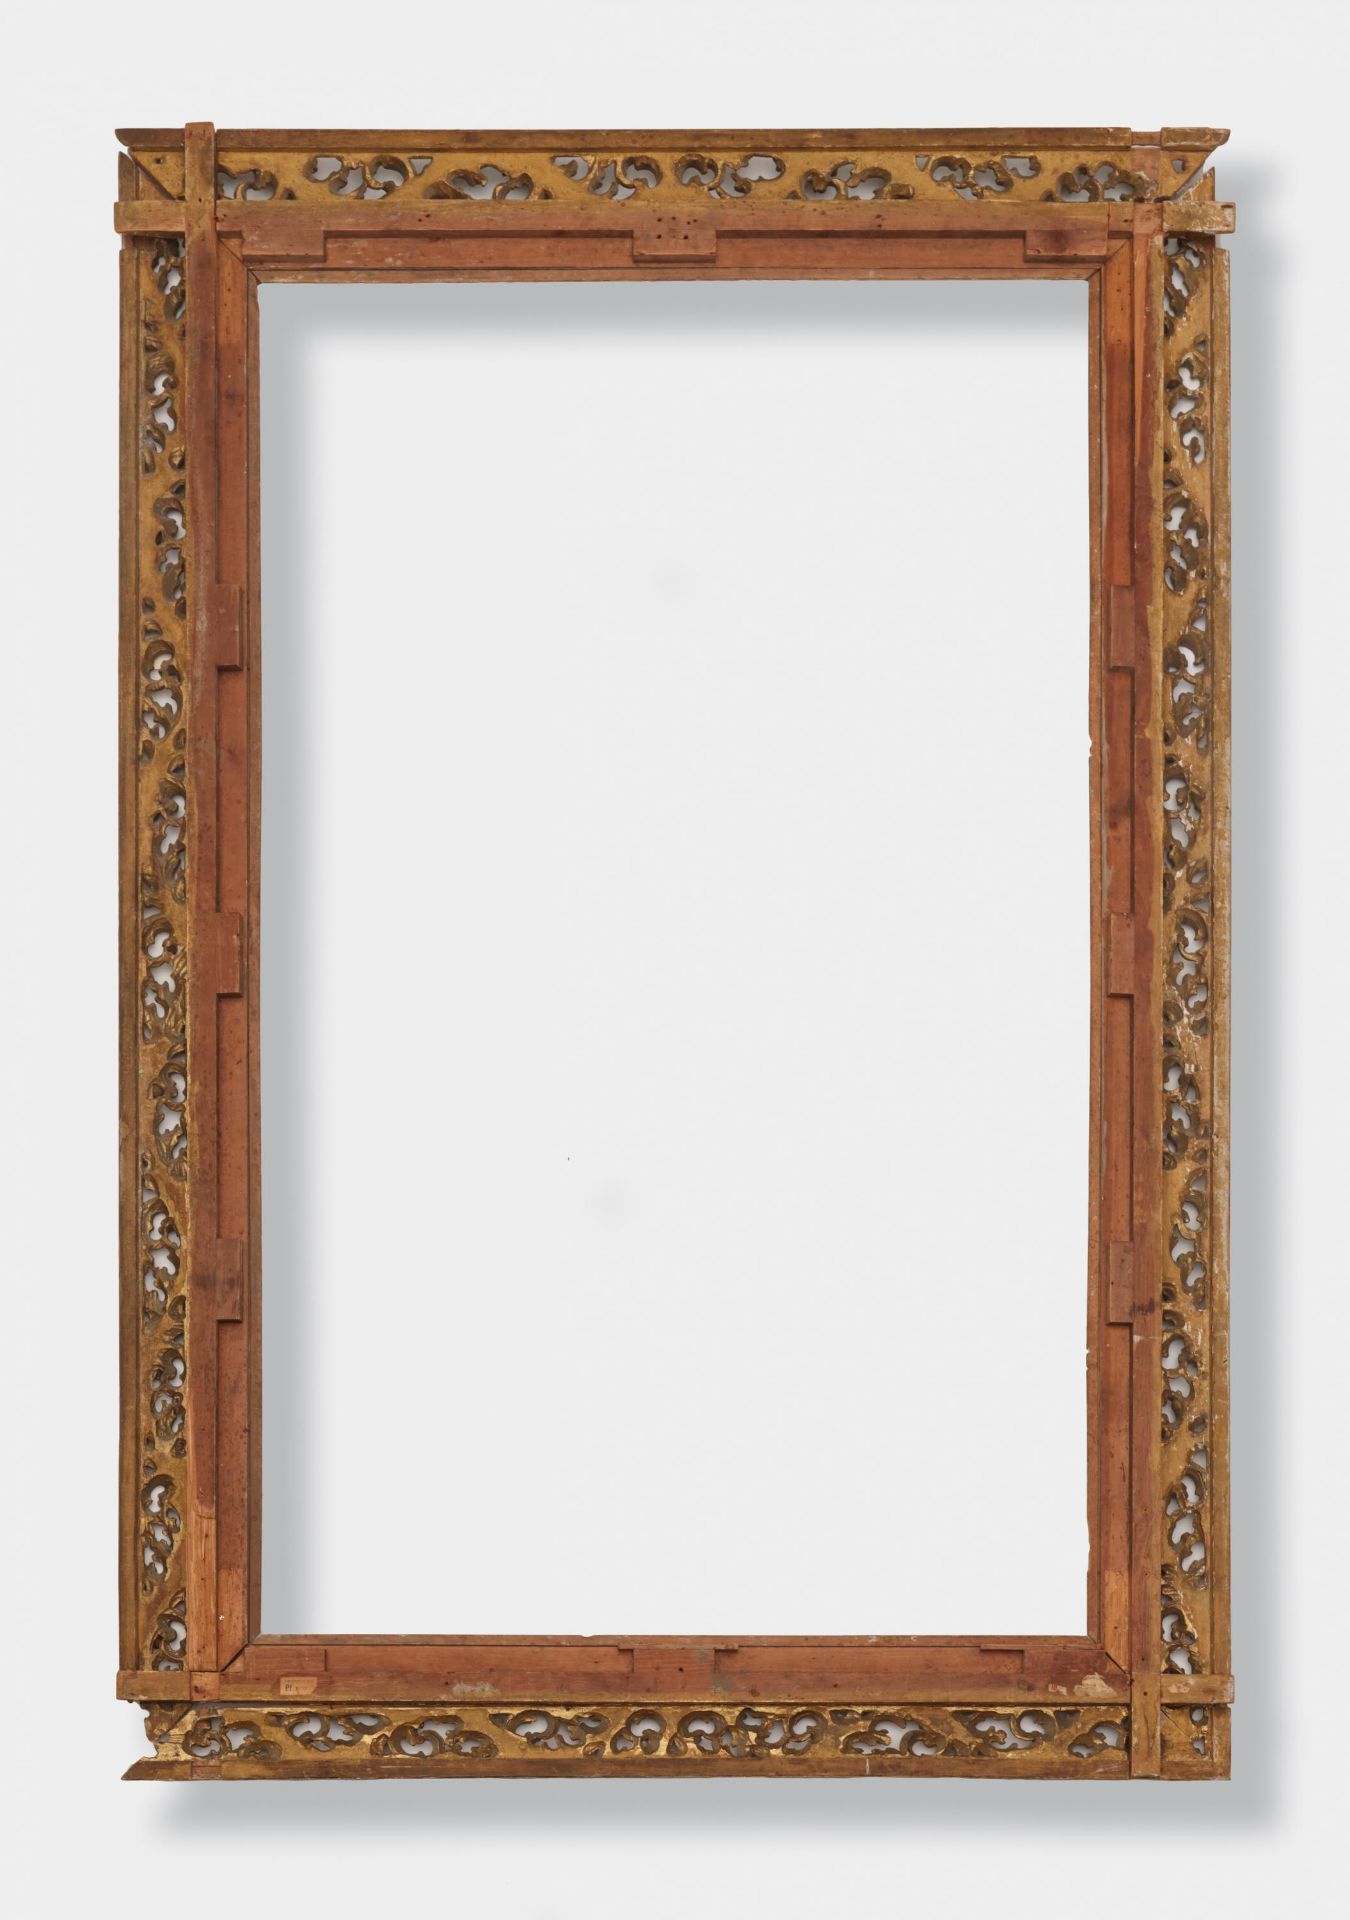 Bologna: Four Singular Sides of the Frame in the Style of the Bolognese Floral Frame - Image 4 of 4